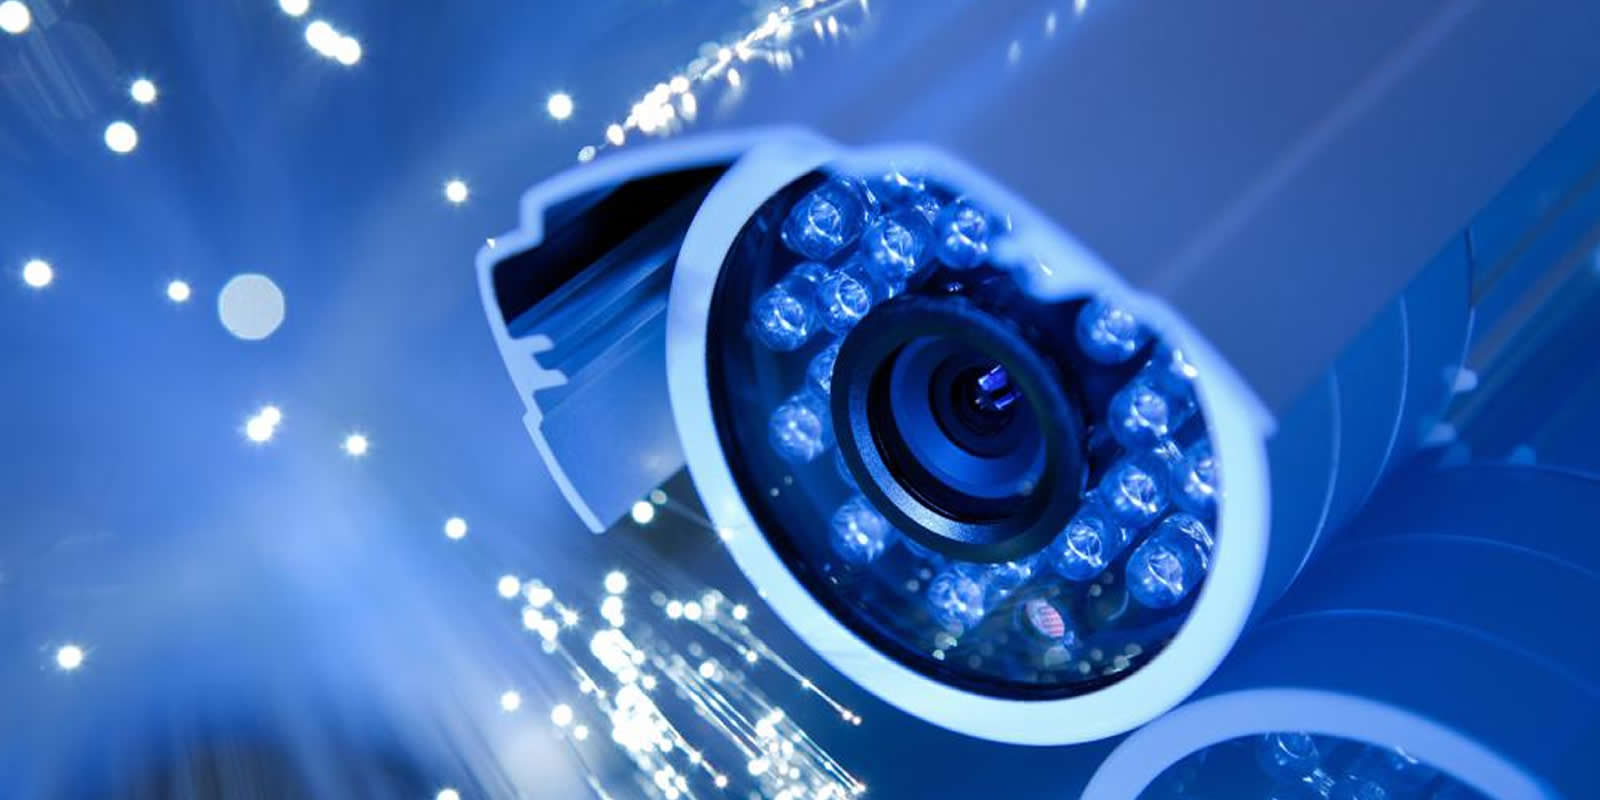 Amekom Systems your partner in CCTV Security Systems